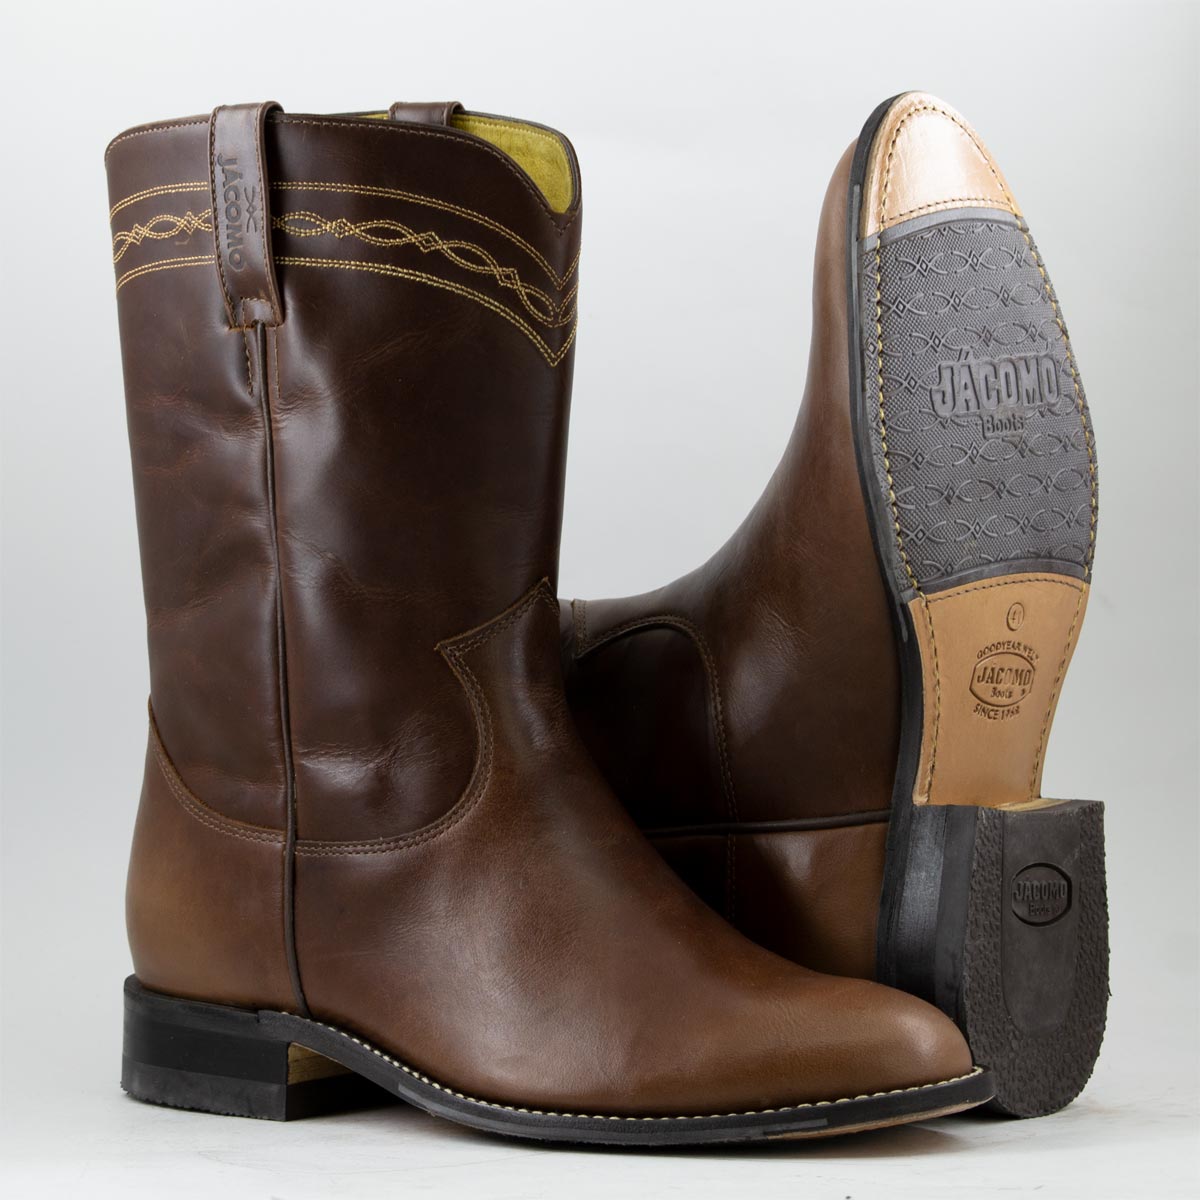 Bota country masculina - Jácomo - Pull up Brown - 0401/CL